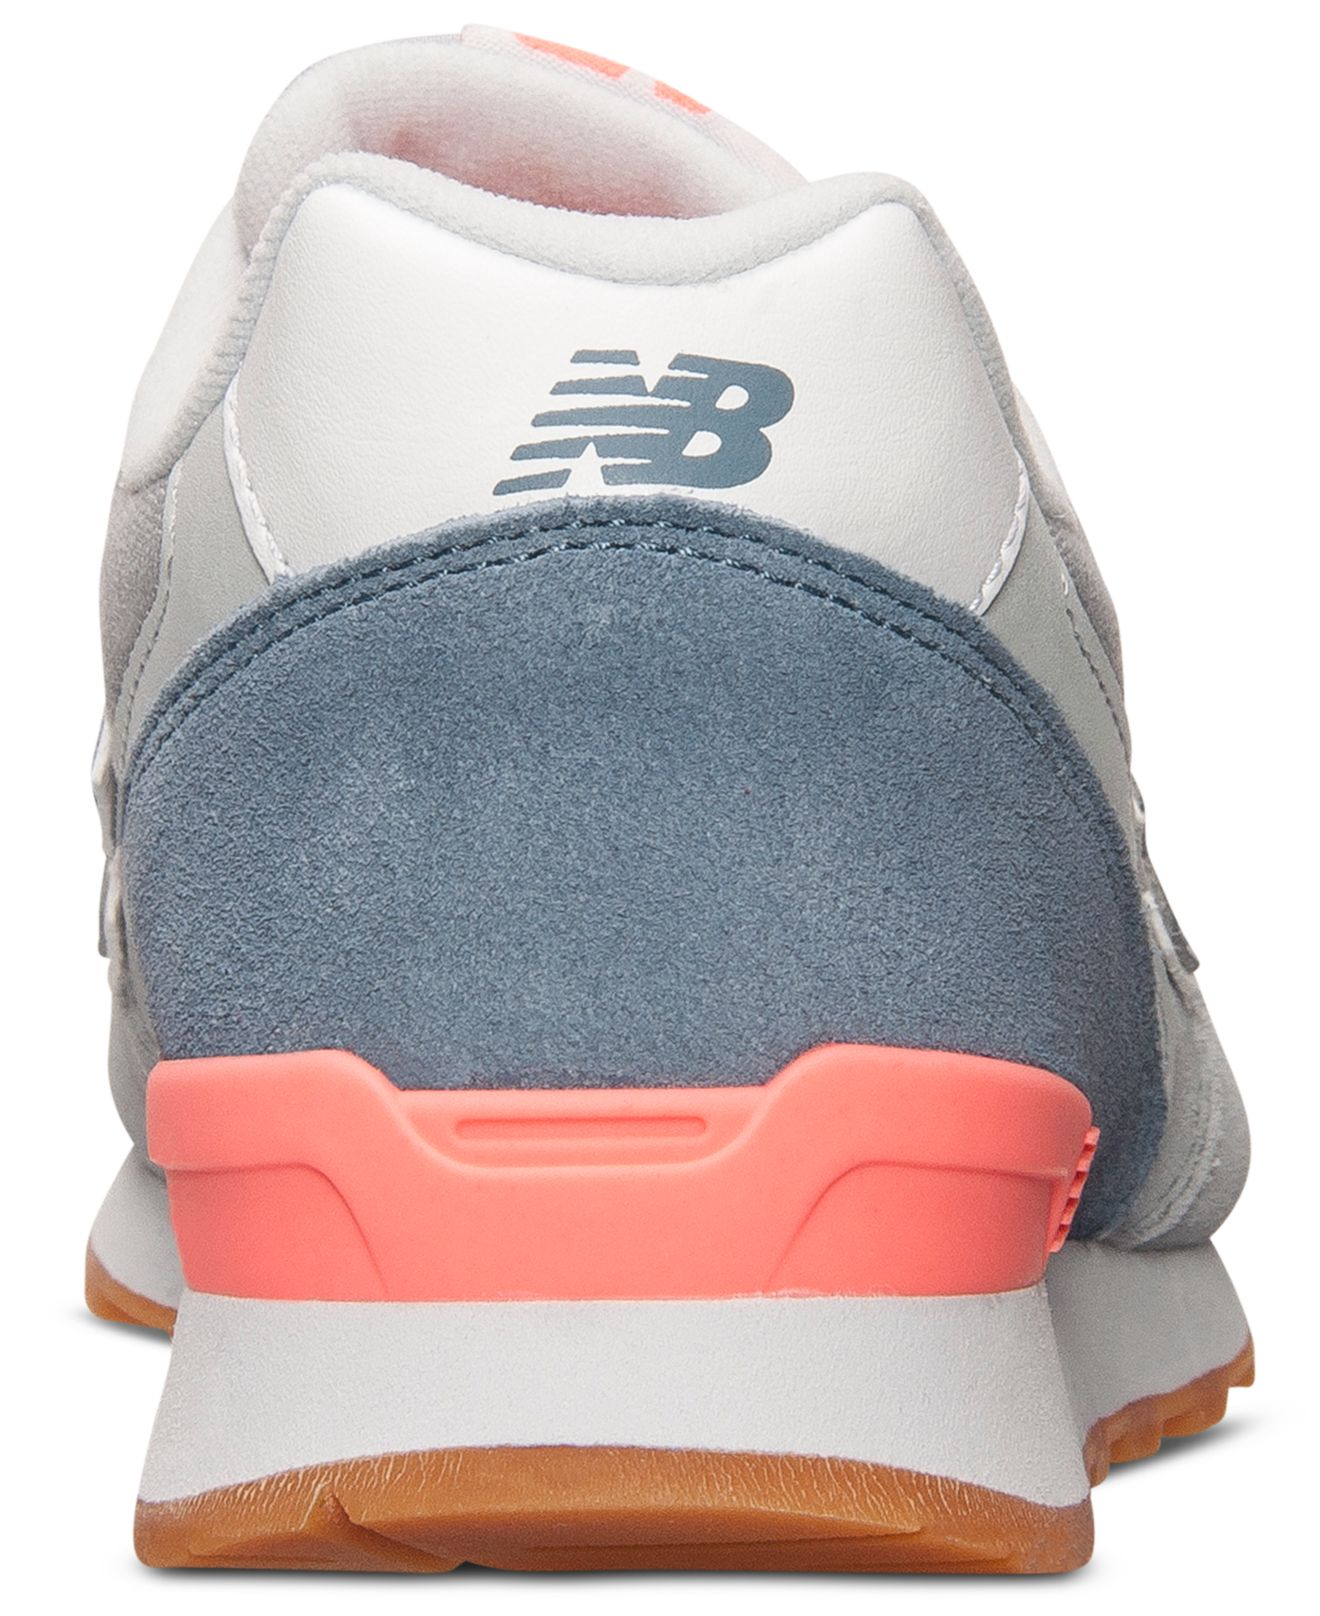 new balance 620 capsule core running sneaker grey Online Shopping mall |  Find the best prices and places to buy -